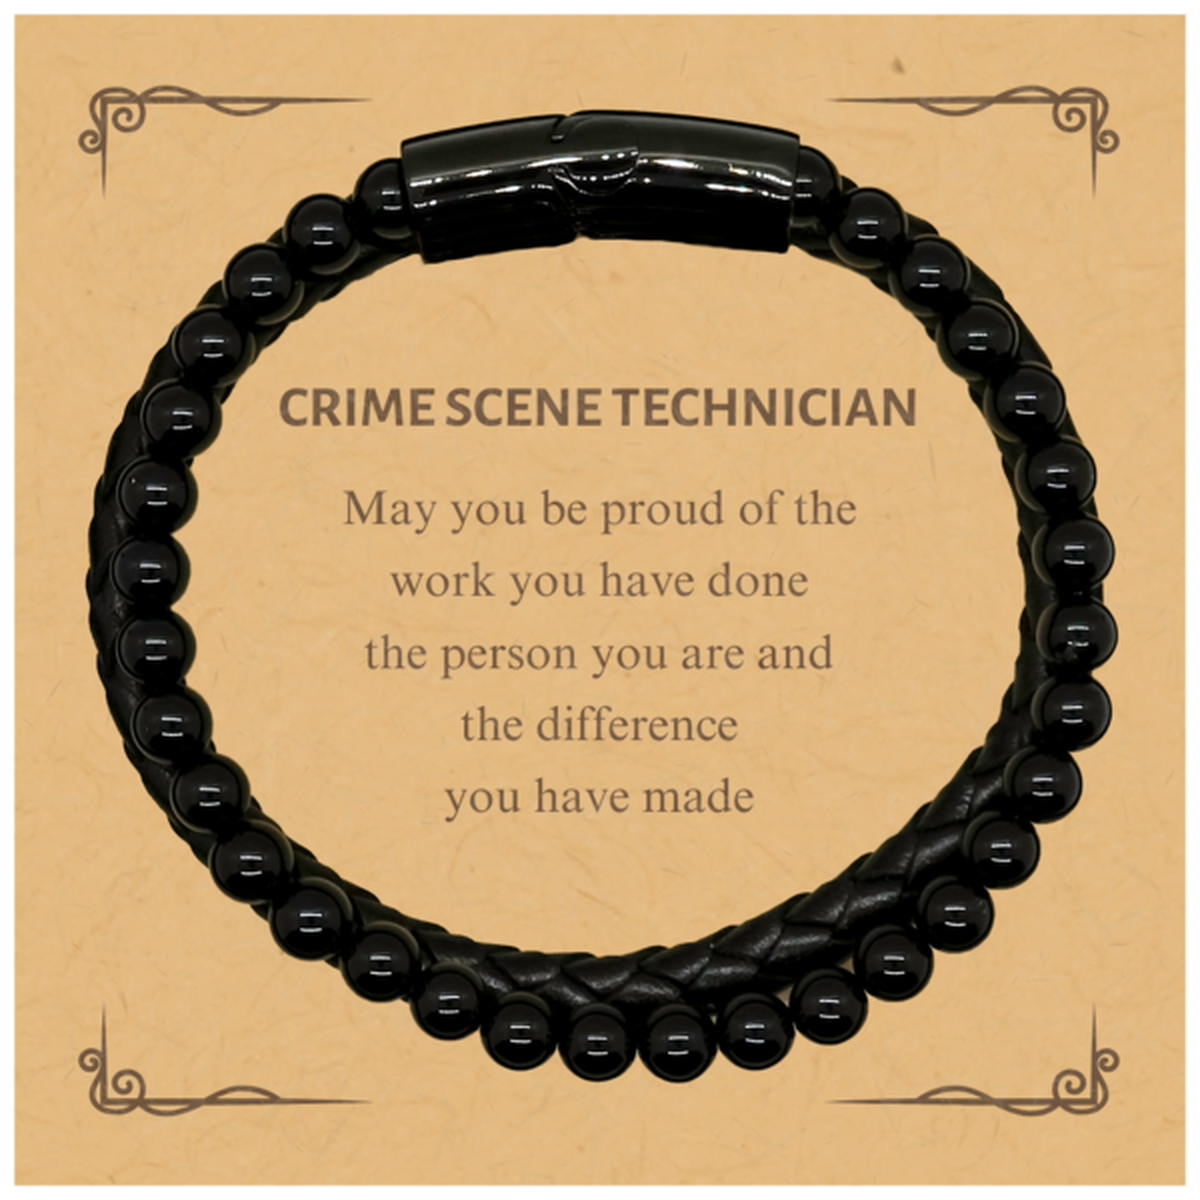 Crime Scene Technician May you be proud of the work you have done, Retirement Crime Scene Technician Stone Leather Bracelets for Colleague Appreciation Gifts Amazing for Crime Scene Technician